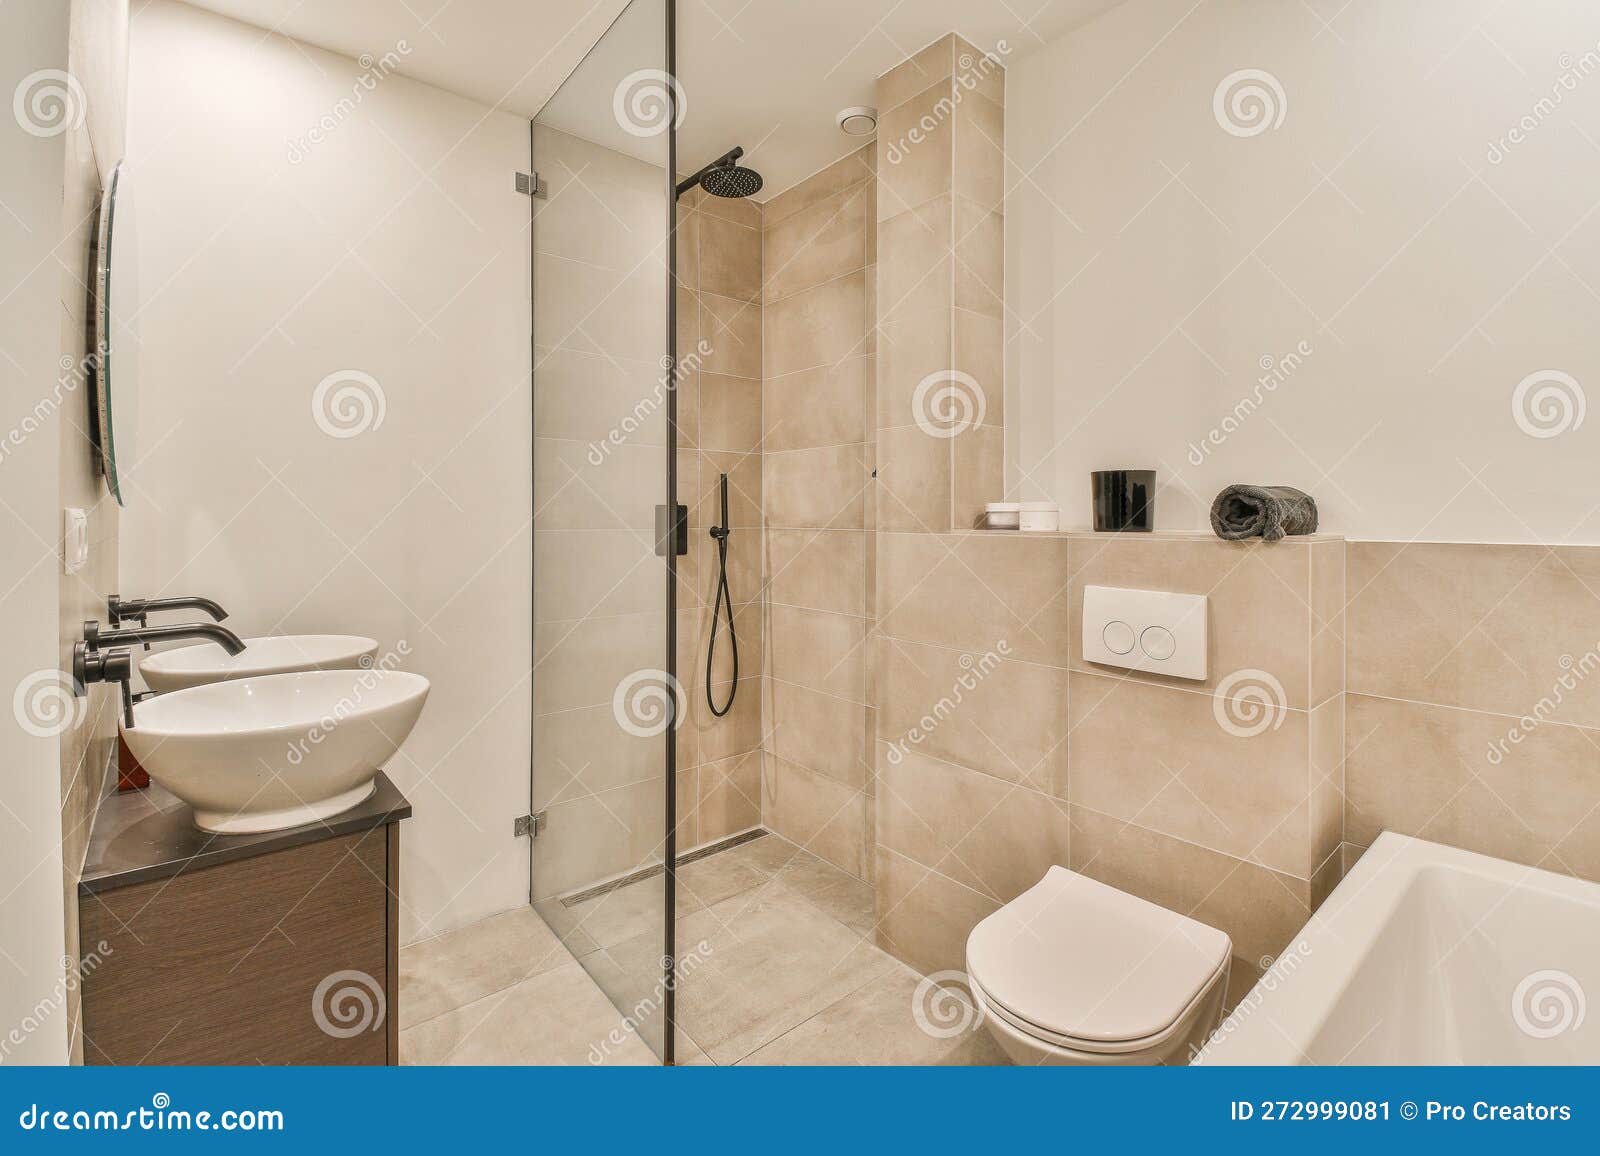 A Bathroom With A Shower Toilet Sink And Bath Tub Stock Image Image